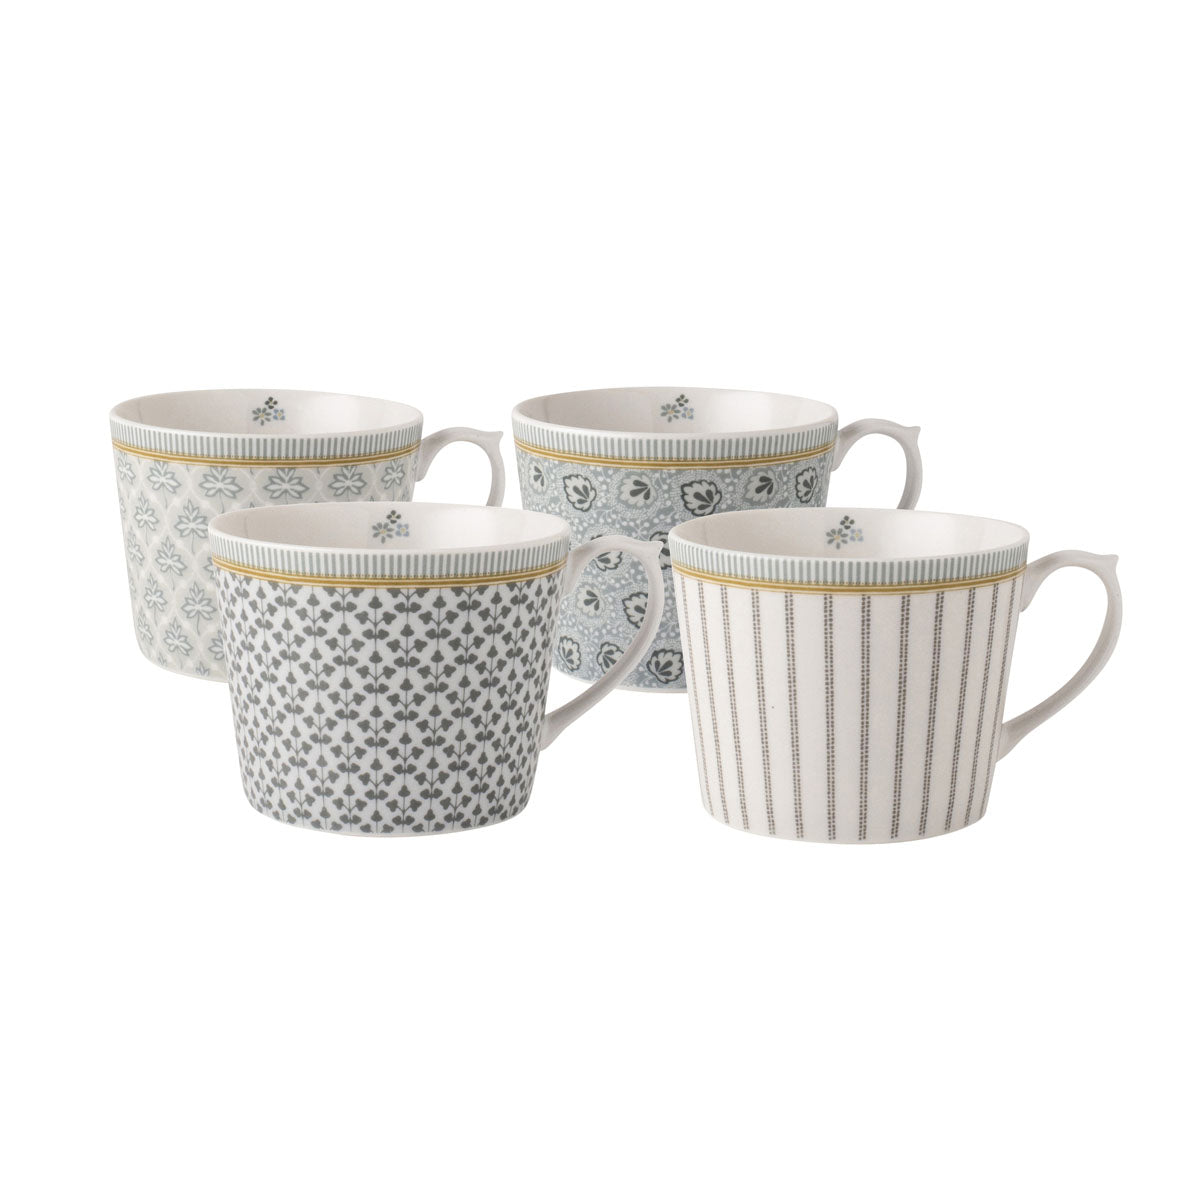 Laura Ashley Giftset 4 Mugs Low Assorted 30 cl.